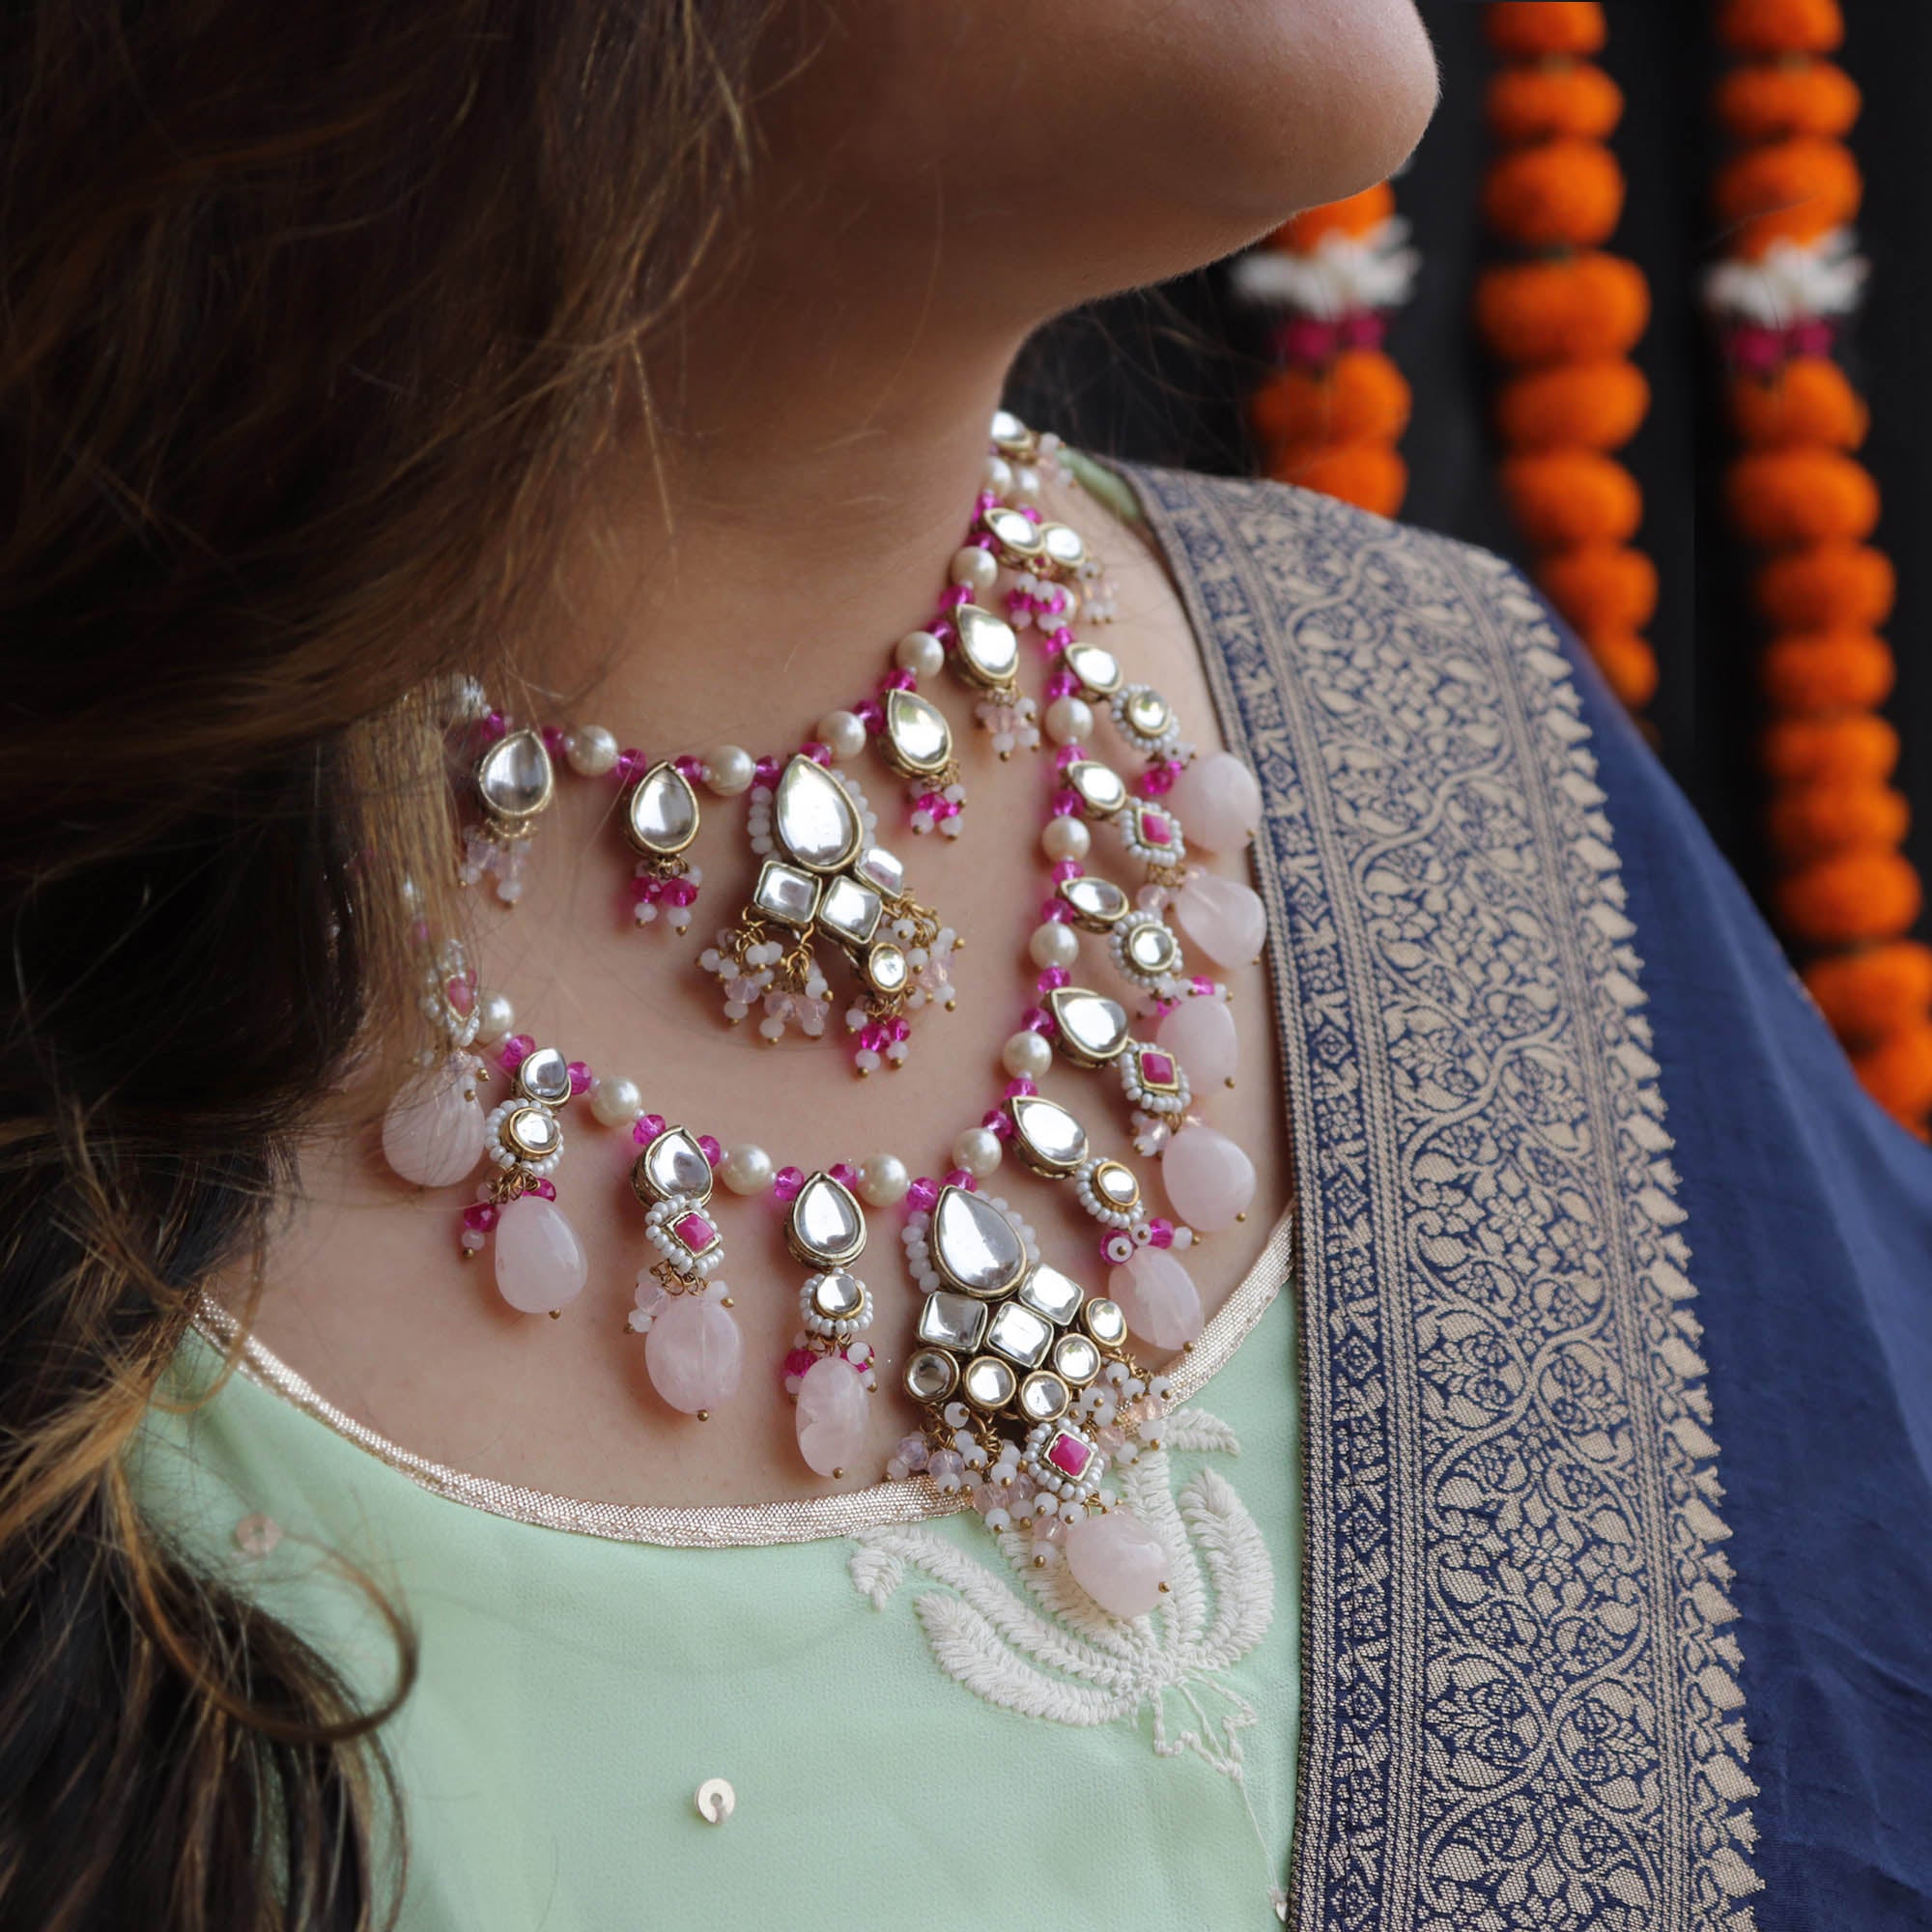 Beabhika Handmade Artificial Jewelry Pink Color Stones Kundan Necklace Gold Tone Kundan Choker Neckalce Set With Matching Earrings Kundan Jewelry Set Rose Quartz Stones Necklace With Same Style Earrings Available On COD In India Delhi Express Shipping Jewelry Heavy Necklace Set For Indian Party Ethnic Dress Matching Heavy Work Gold Plated Necklace Traditional Heeramandi Style Jewelry